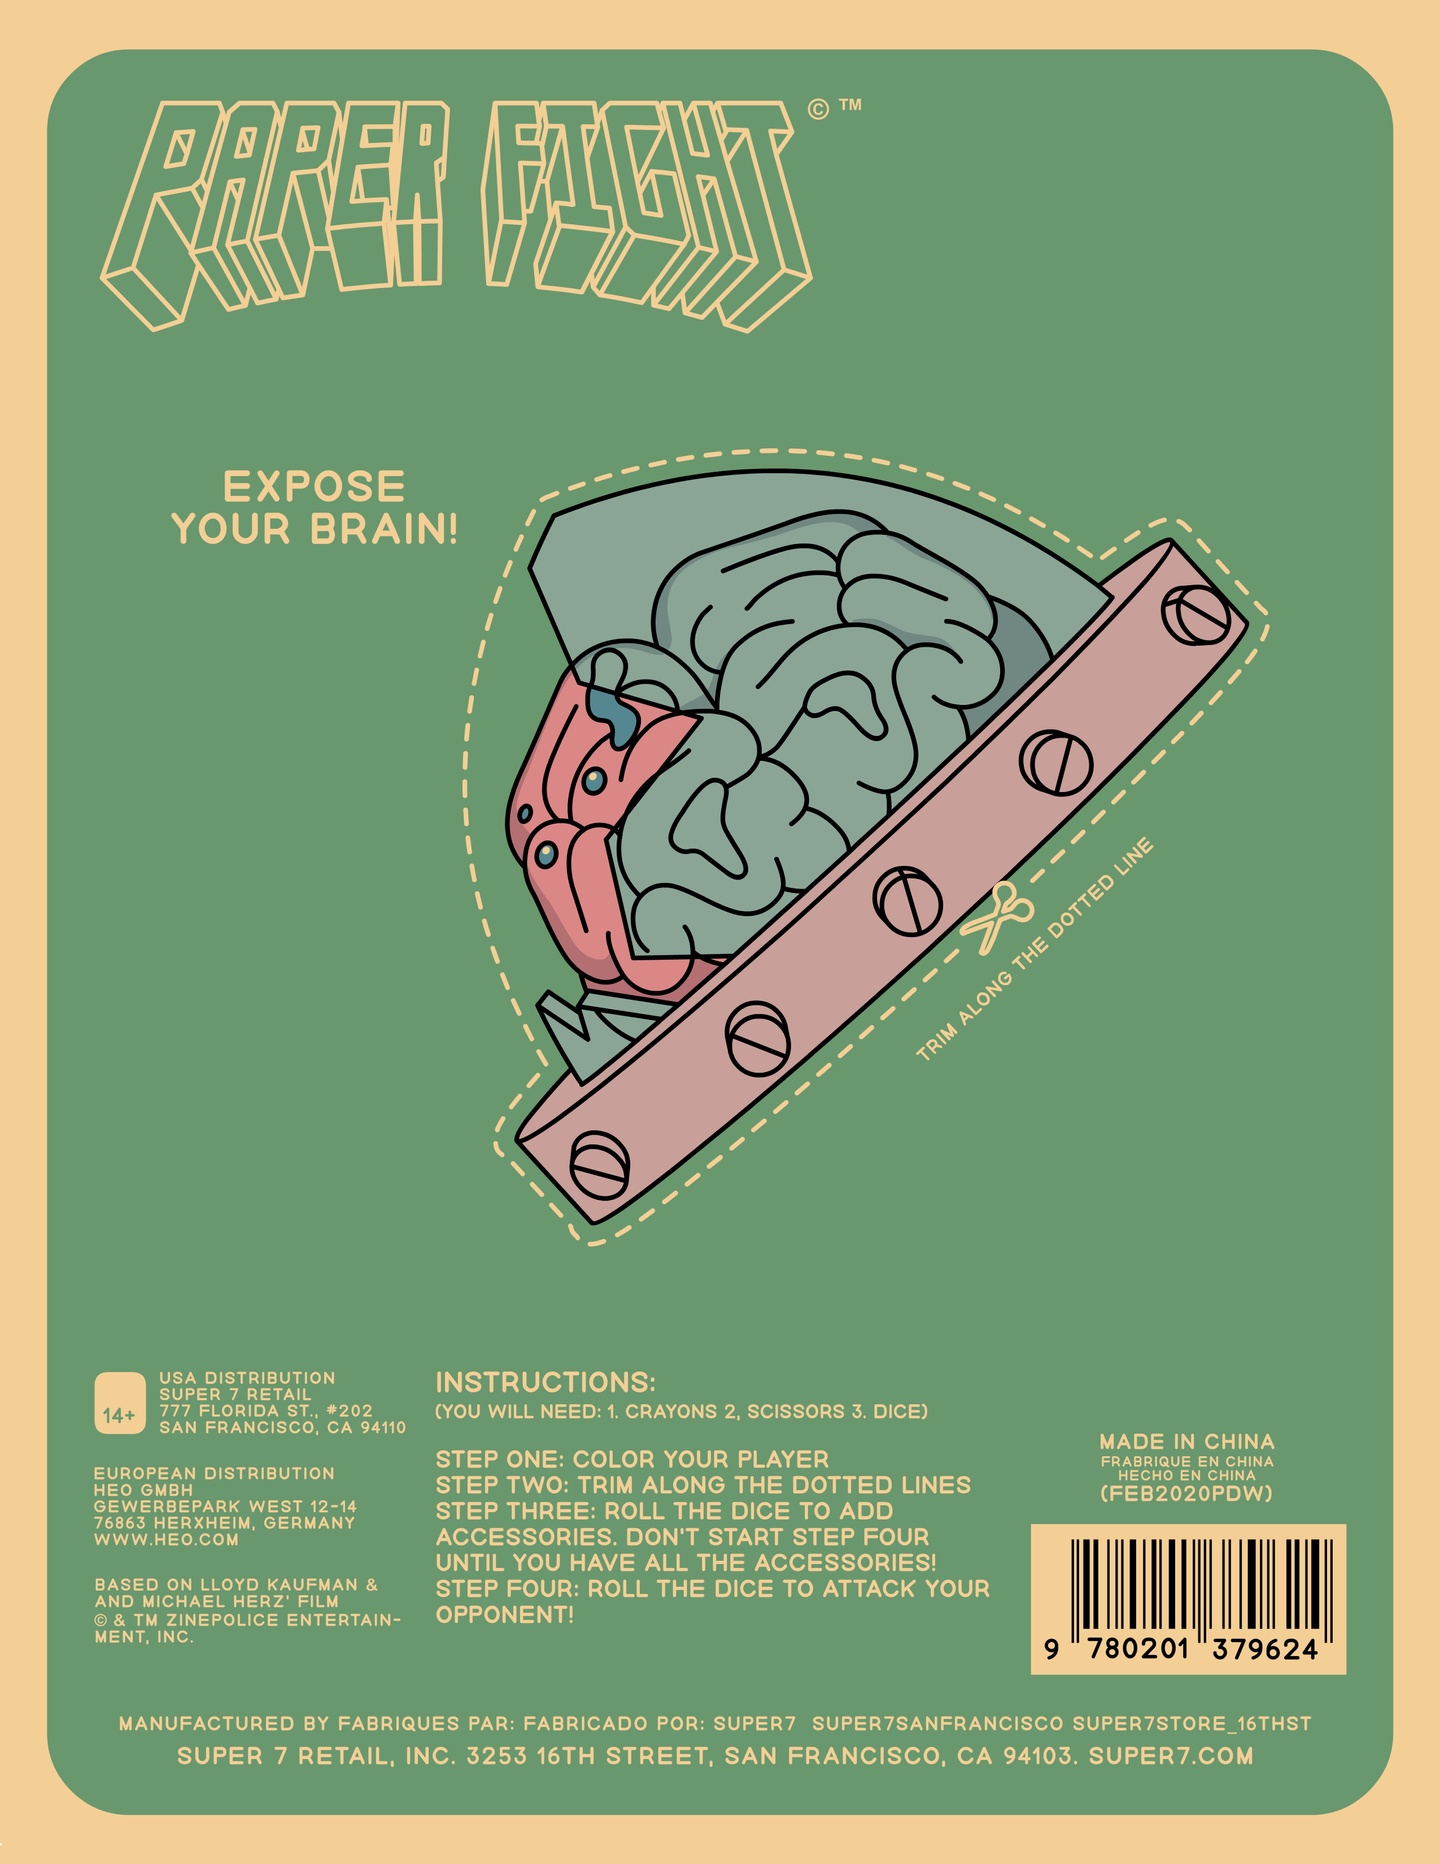 Back cover of Paper Fight - green background with an illustrated brain in a jar with dotted lines to trim out, exclaiming "Expose your brain!"